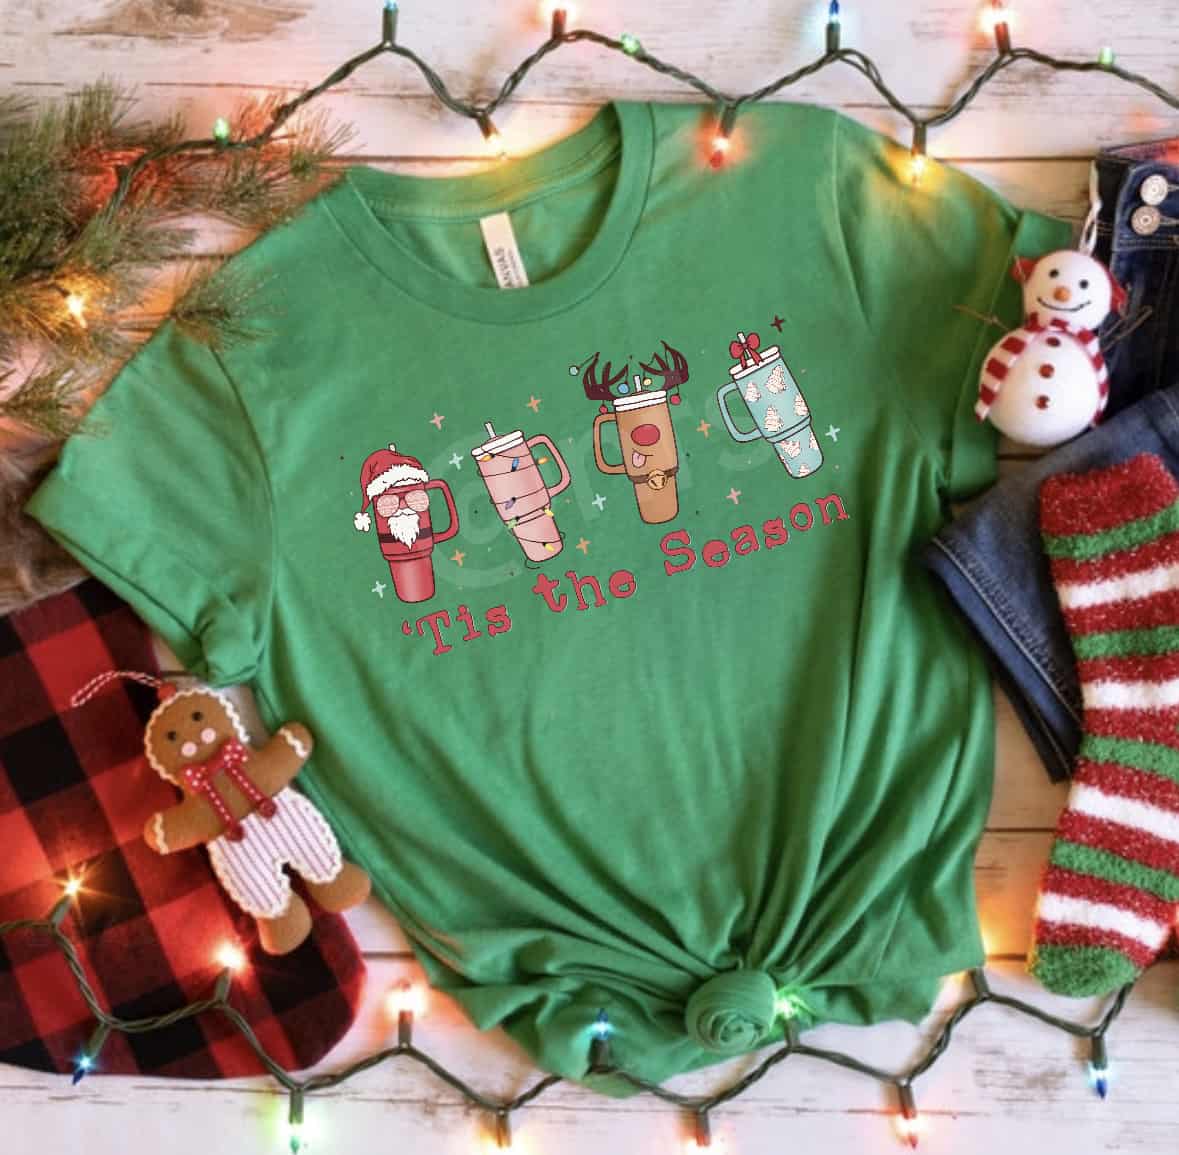 Stanley Cup season with this comfy and showy christmas  t-shirt!